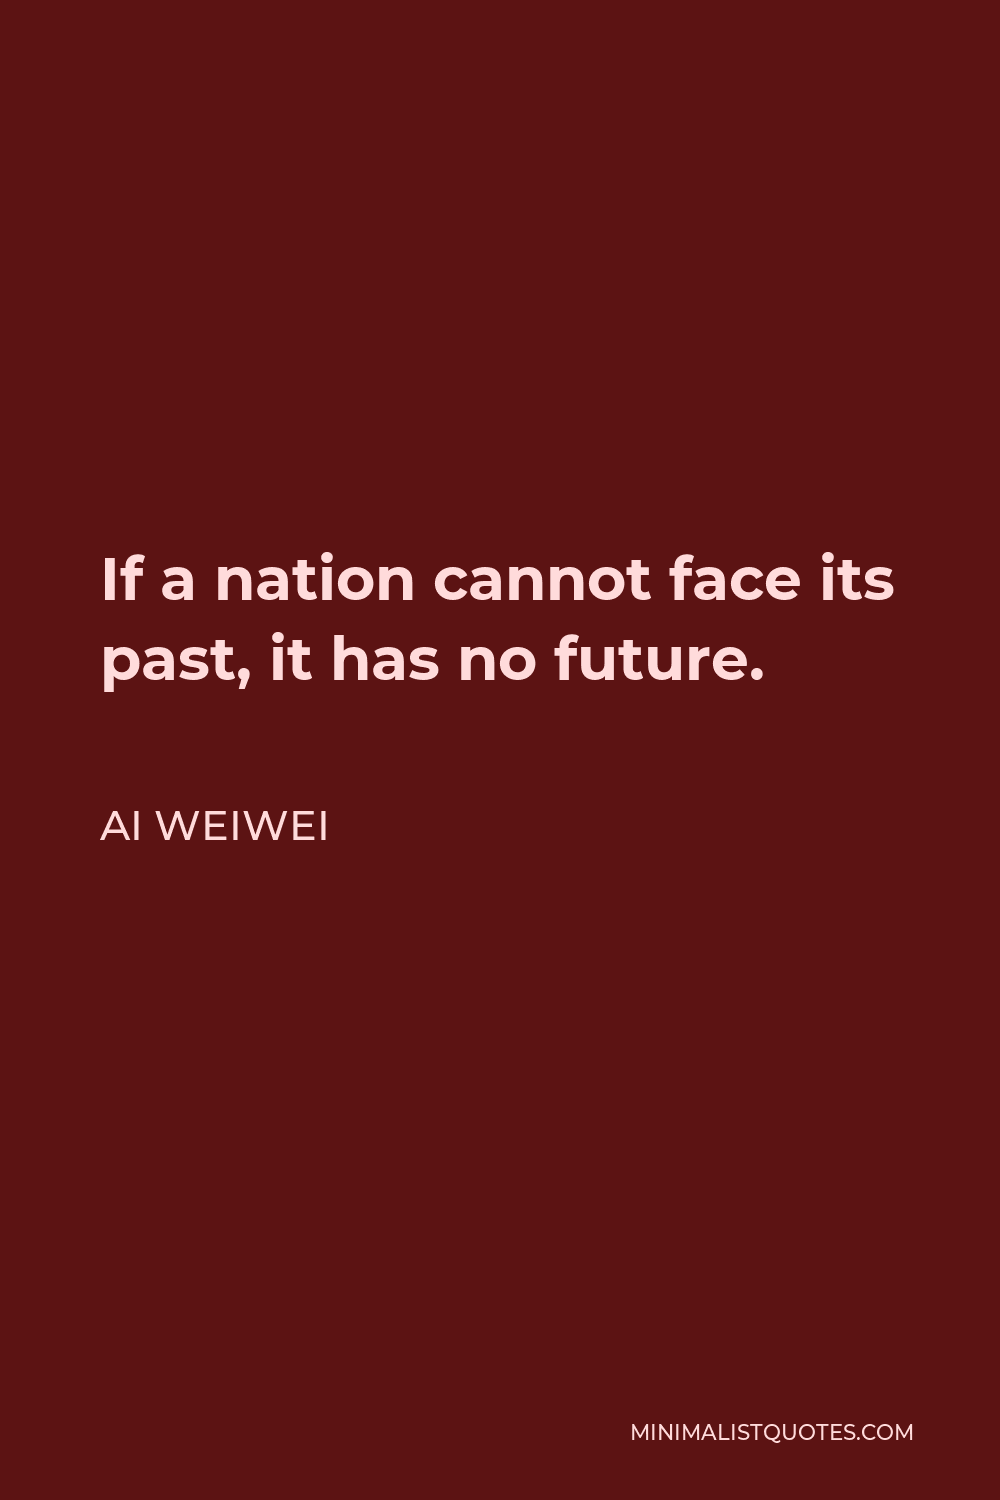 Ai Weiwei Quote - If a nation cannot face its past, it has no future.